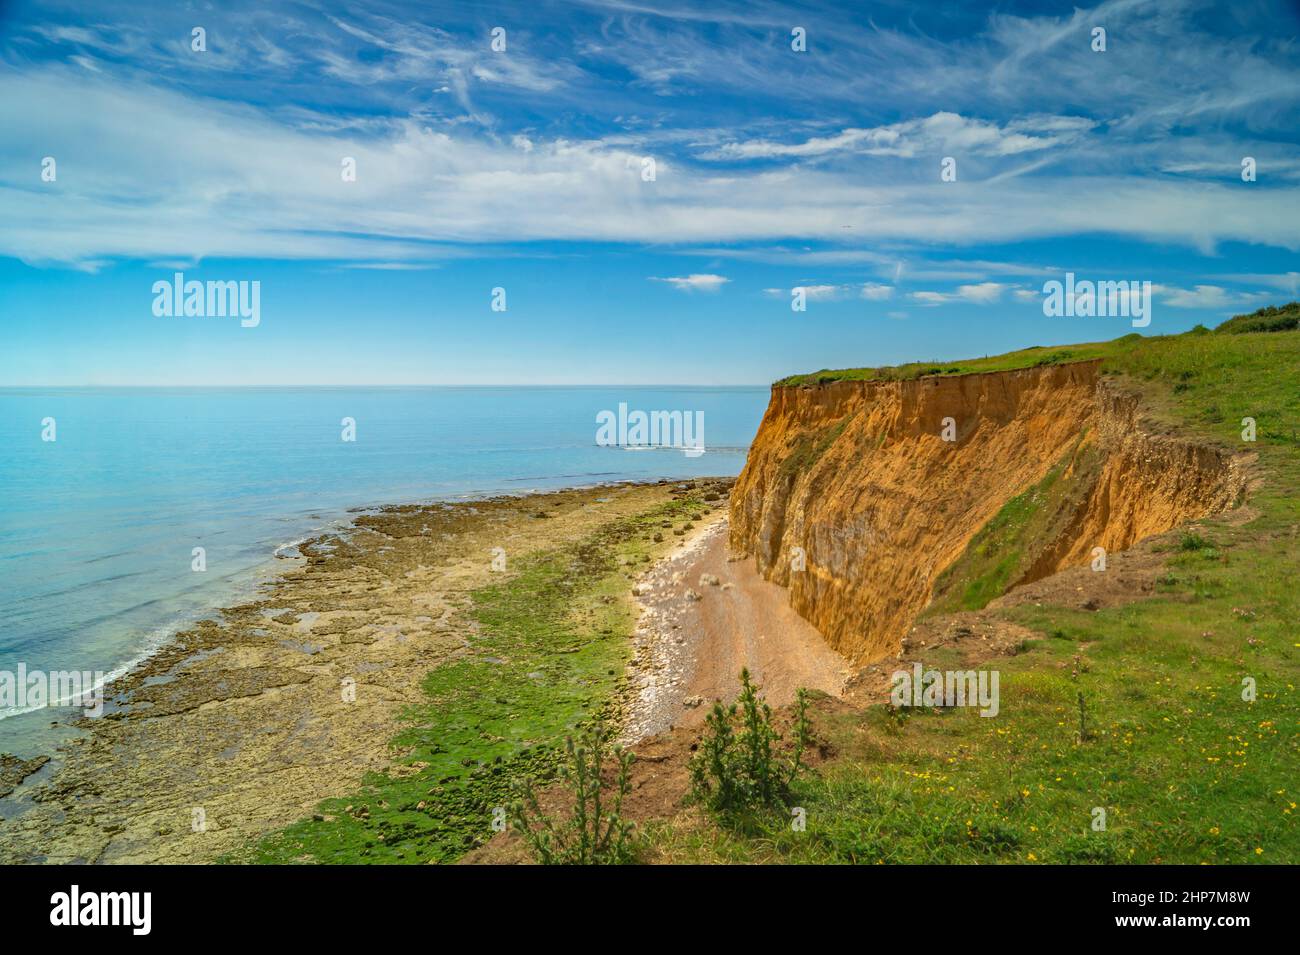 The seashore and cliff face at the Seven Sisters cliffs on a beautiful bright day Stock Photo